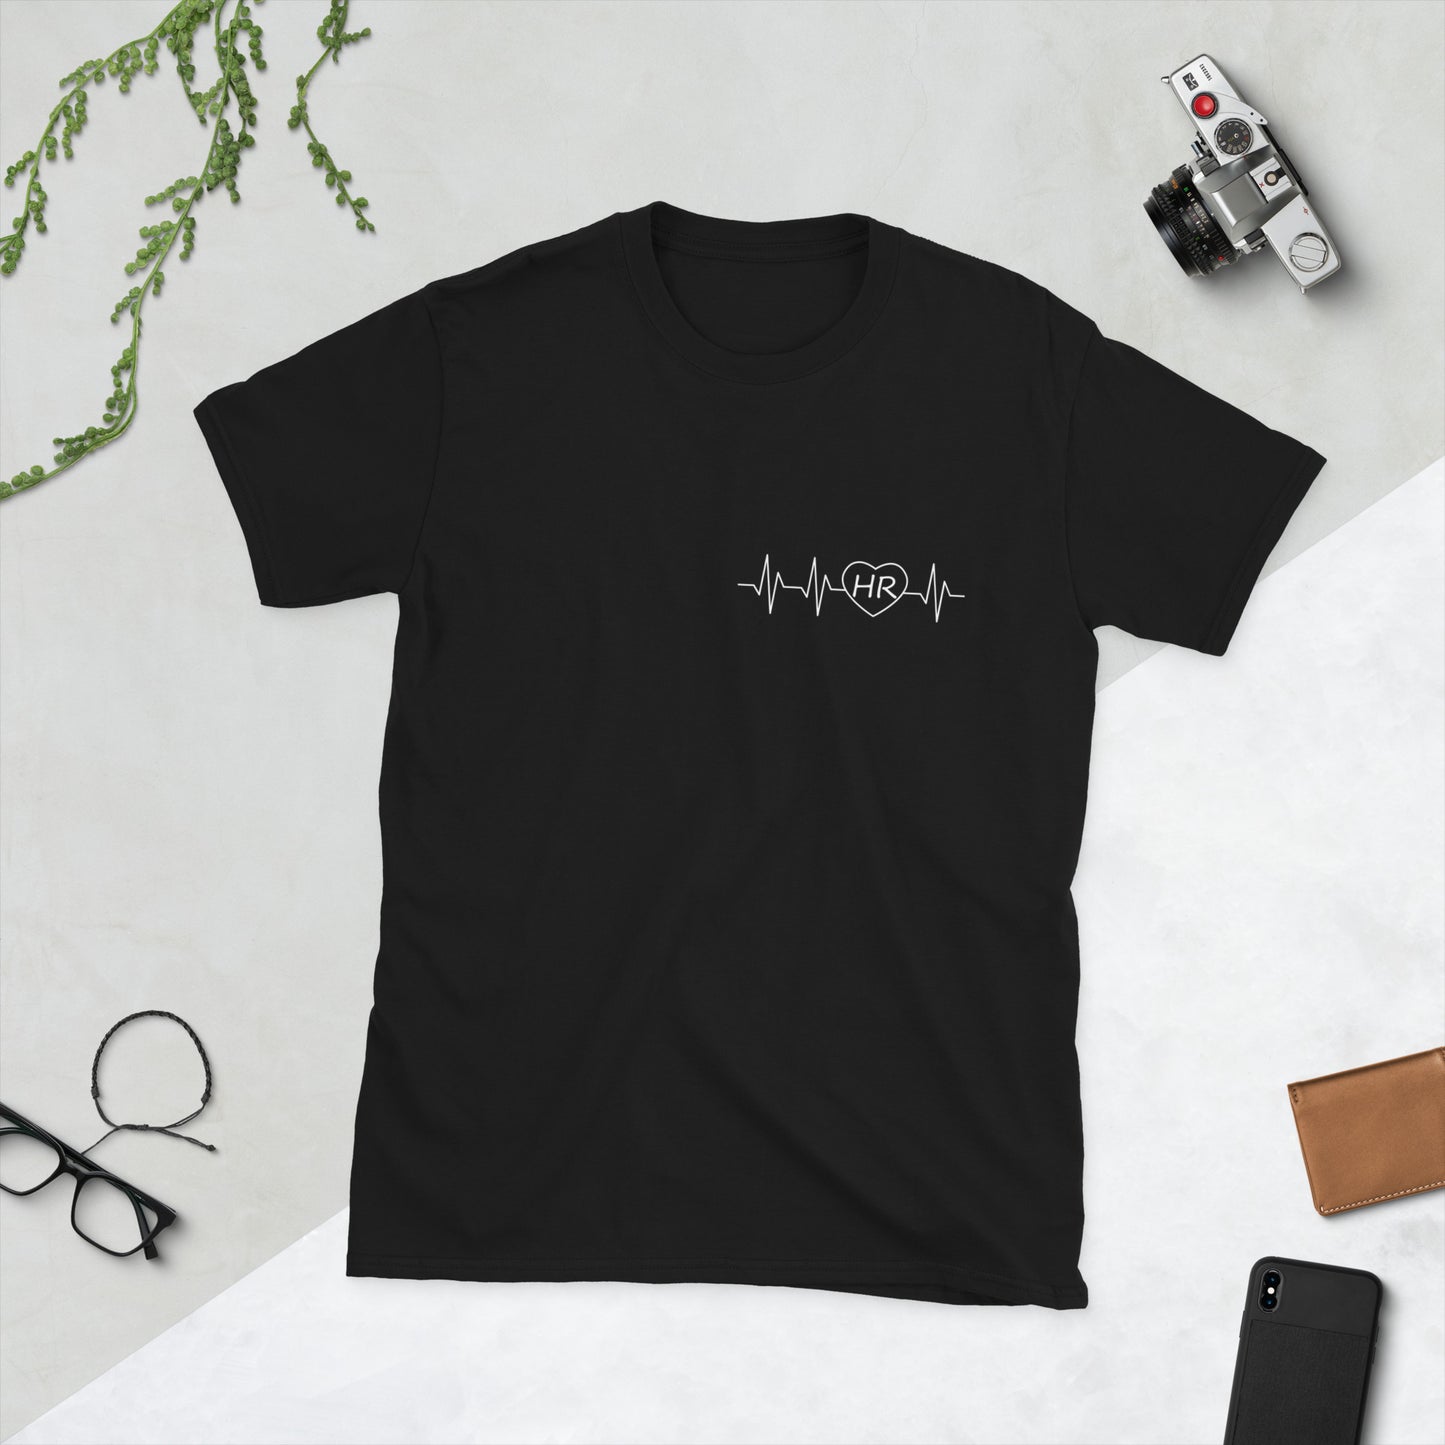 Unisex t-shirt: "I love human resources", with heartbeats